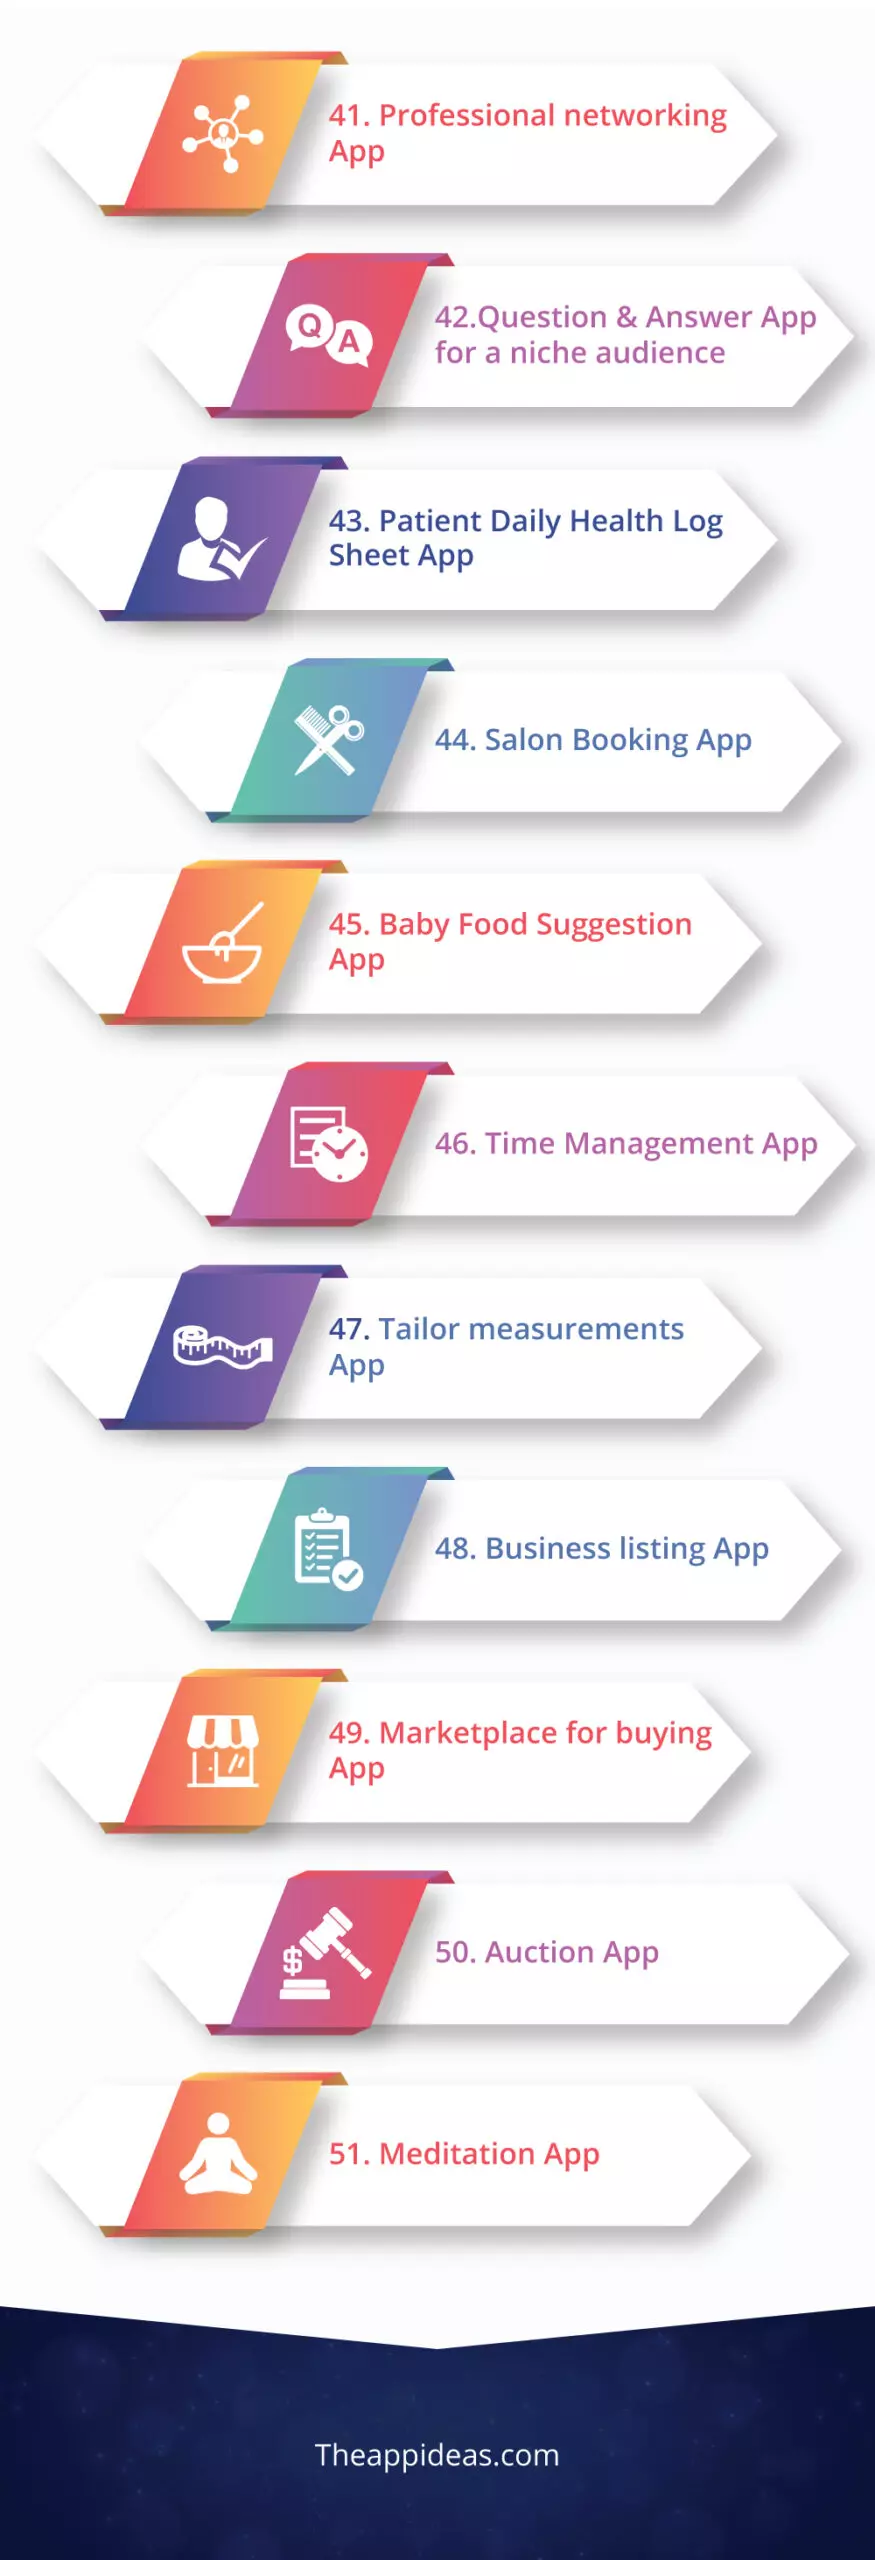 mobile app ideas: 41 to 51 apps